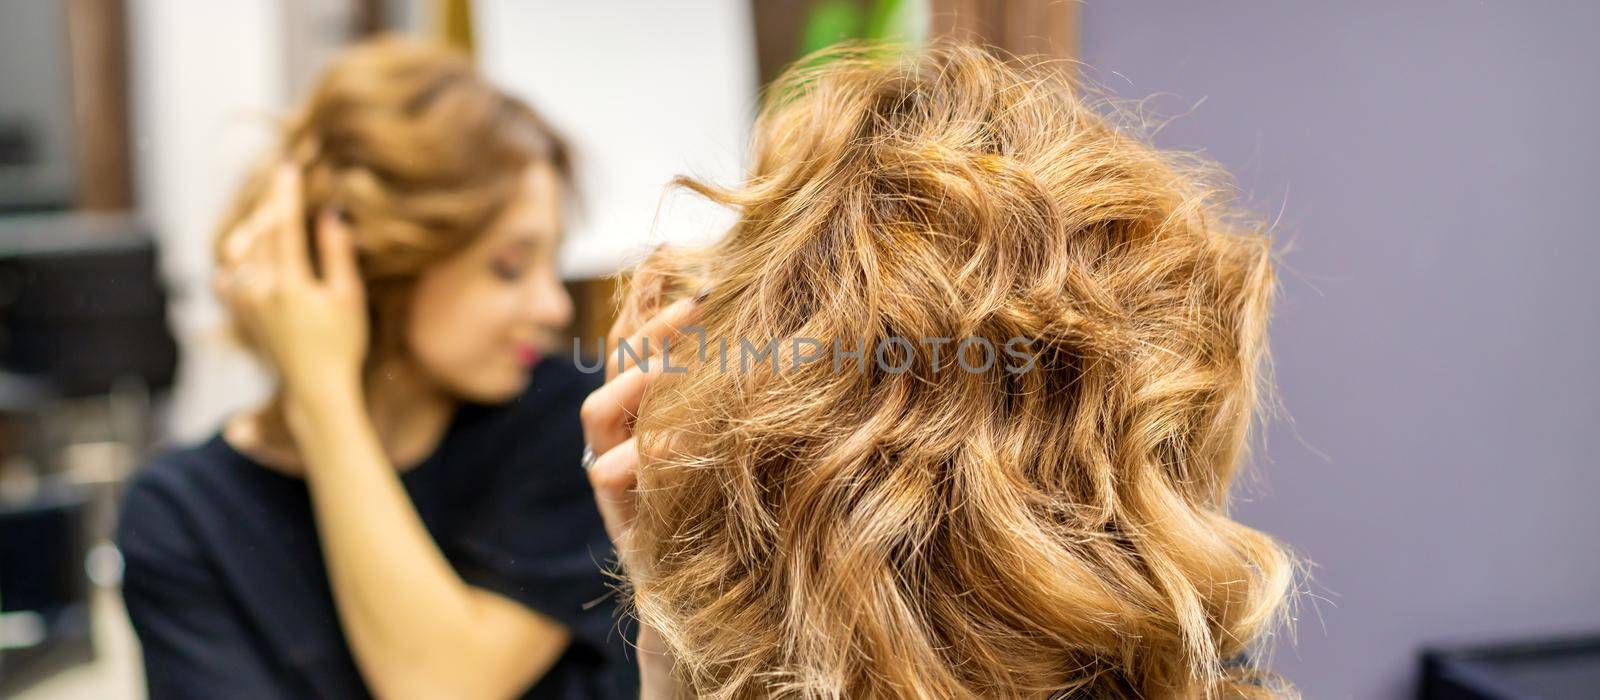 Young woman checking her new curly brown hairstyle in front of the mirror at the hairdresser salon by okskukuruza